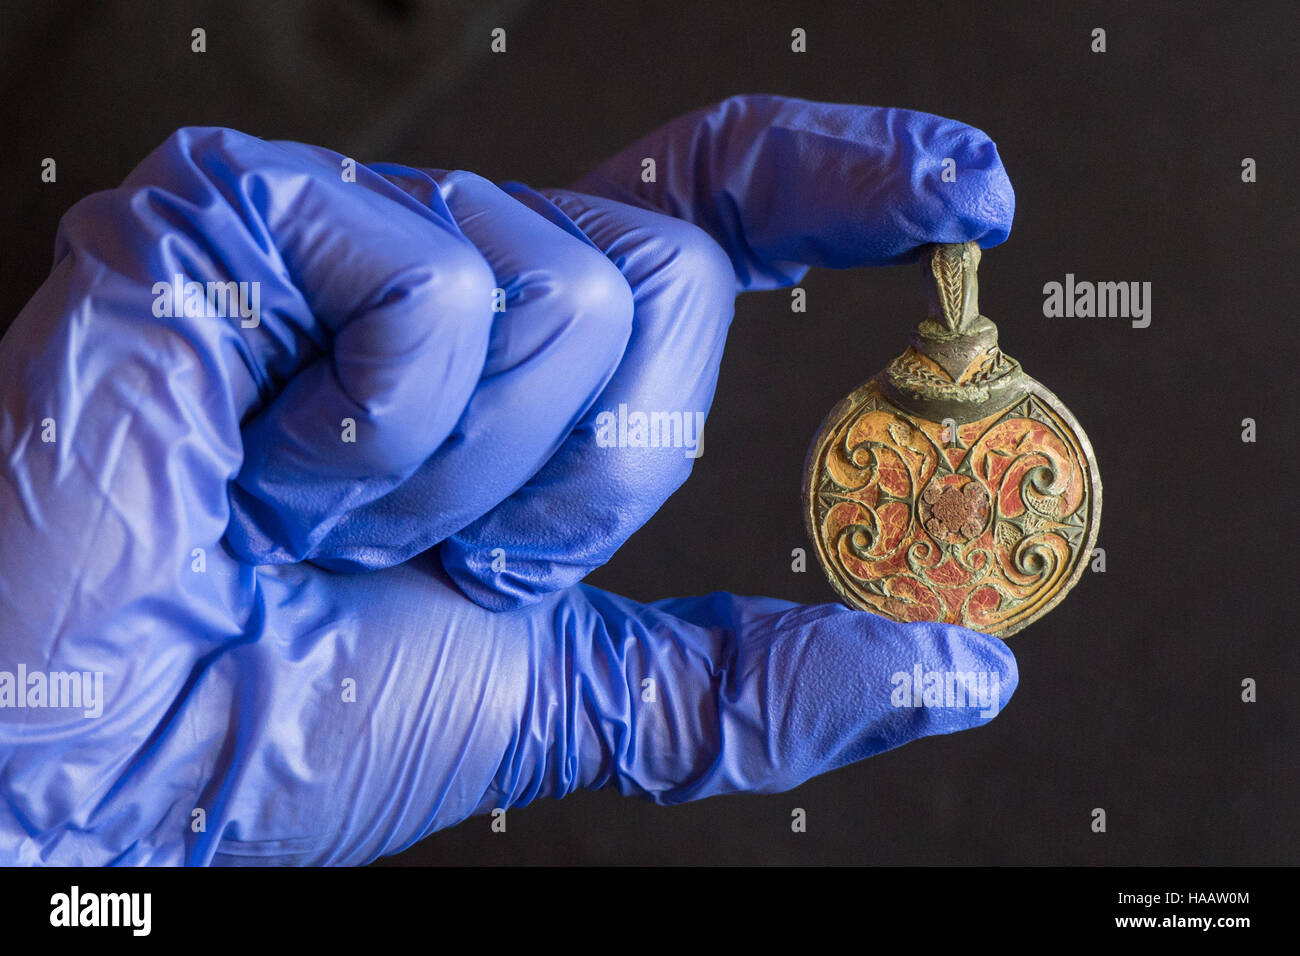 An Anglo-Saxon hanging bowl mount from AD 600-725, found in West Sussex, seen during a photocall at the British museum in London for some of the important finds made by the public in 2015 and recorded under the British Museum's Portable Antiquities Scheme (PAS) and Treasure annual reports. Stock Photo